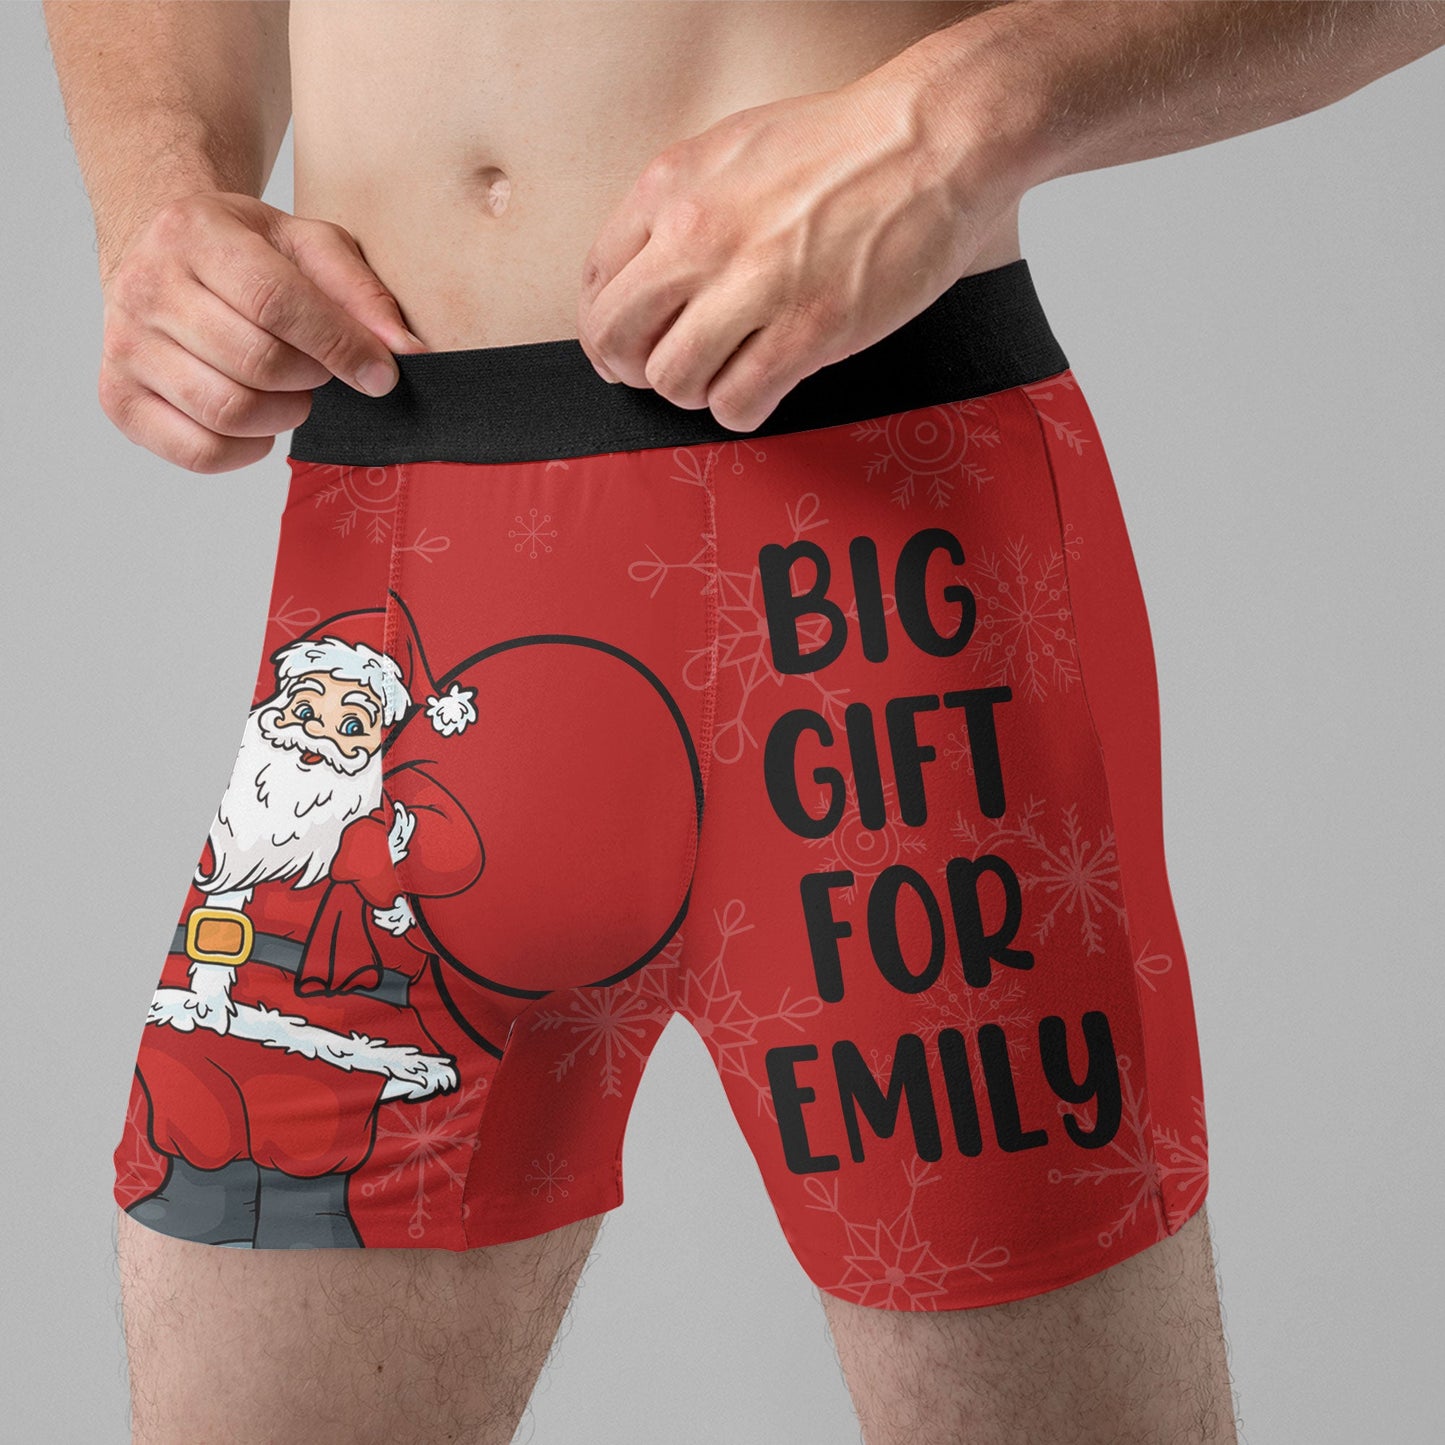 Funny Boxers, Funny Gift for Him, Husband, Fiance, Christmas Gift, Birthday  Gift , Mens Underwear, Sexy Boxers Valentines Boxers. -  Canada